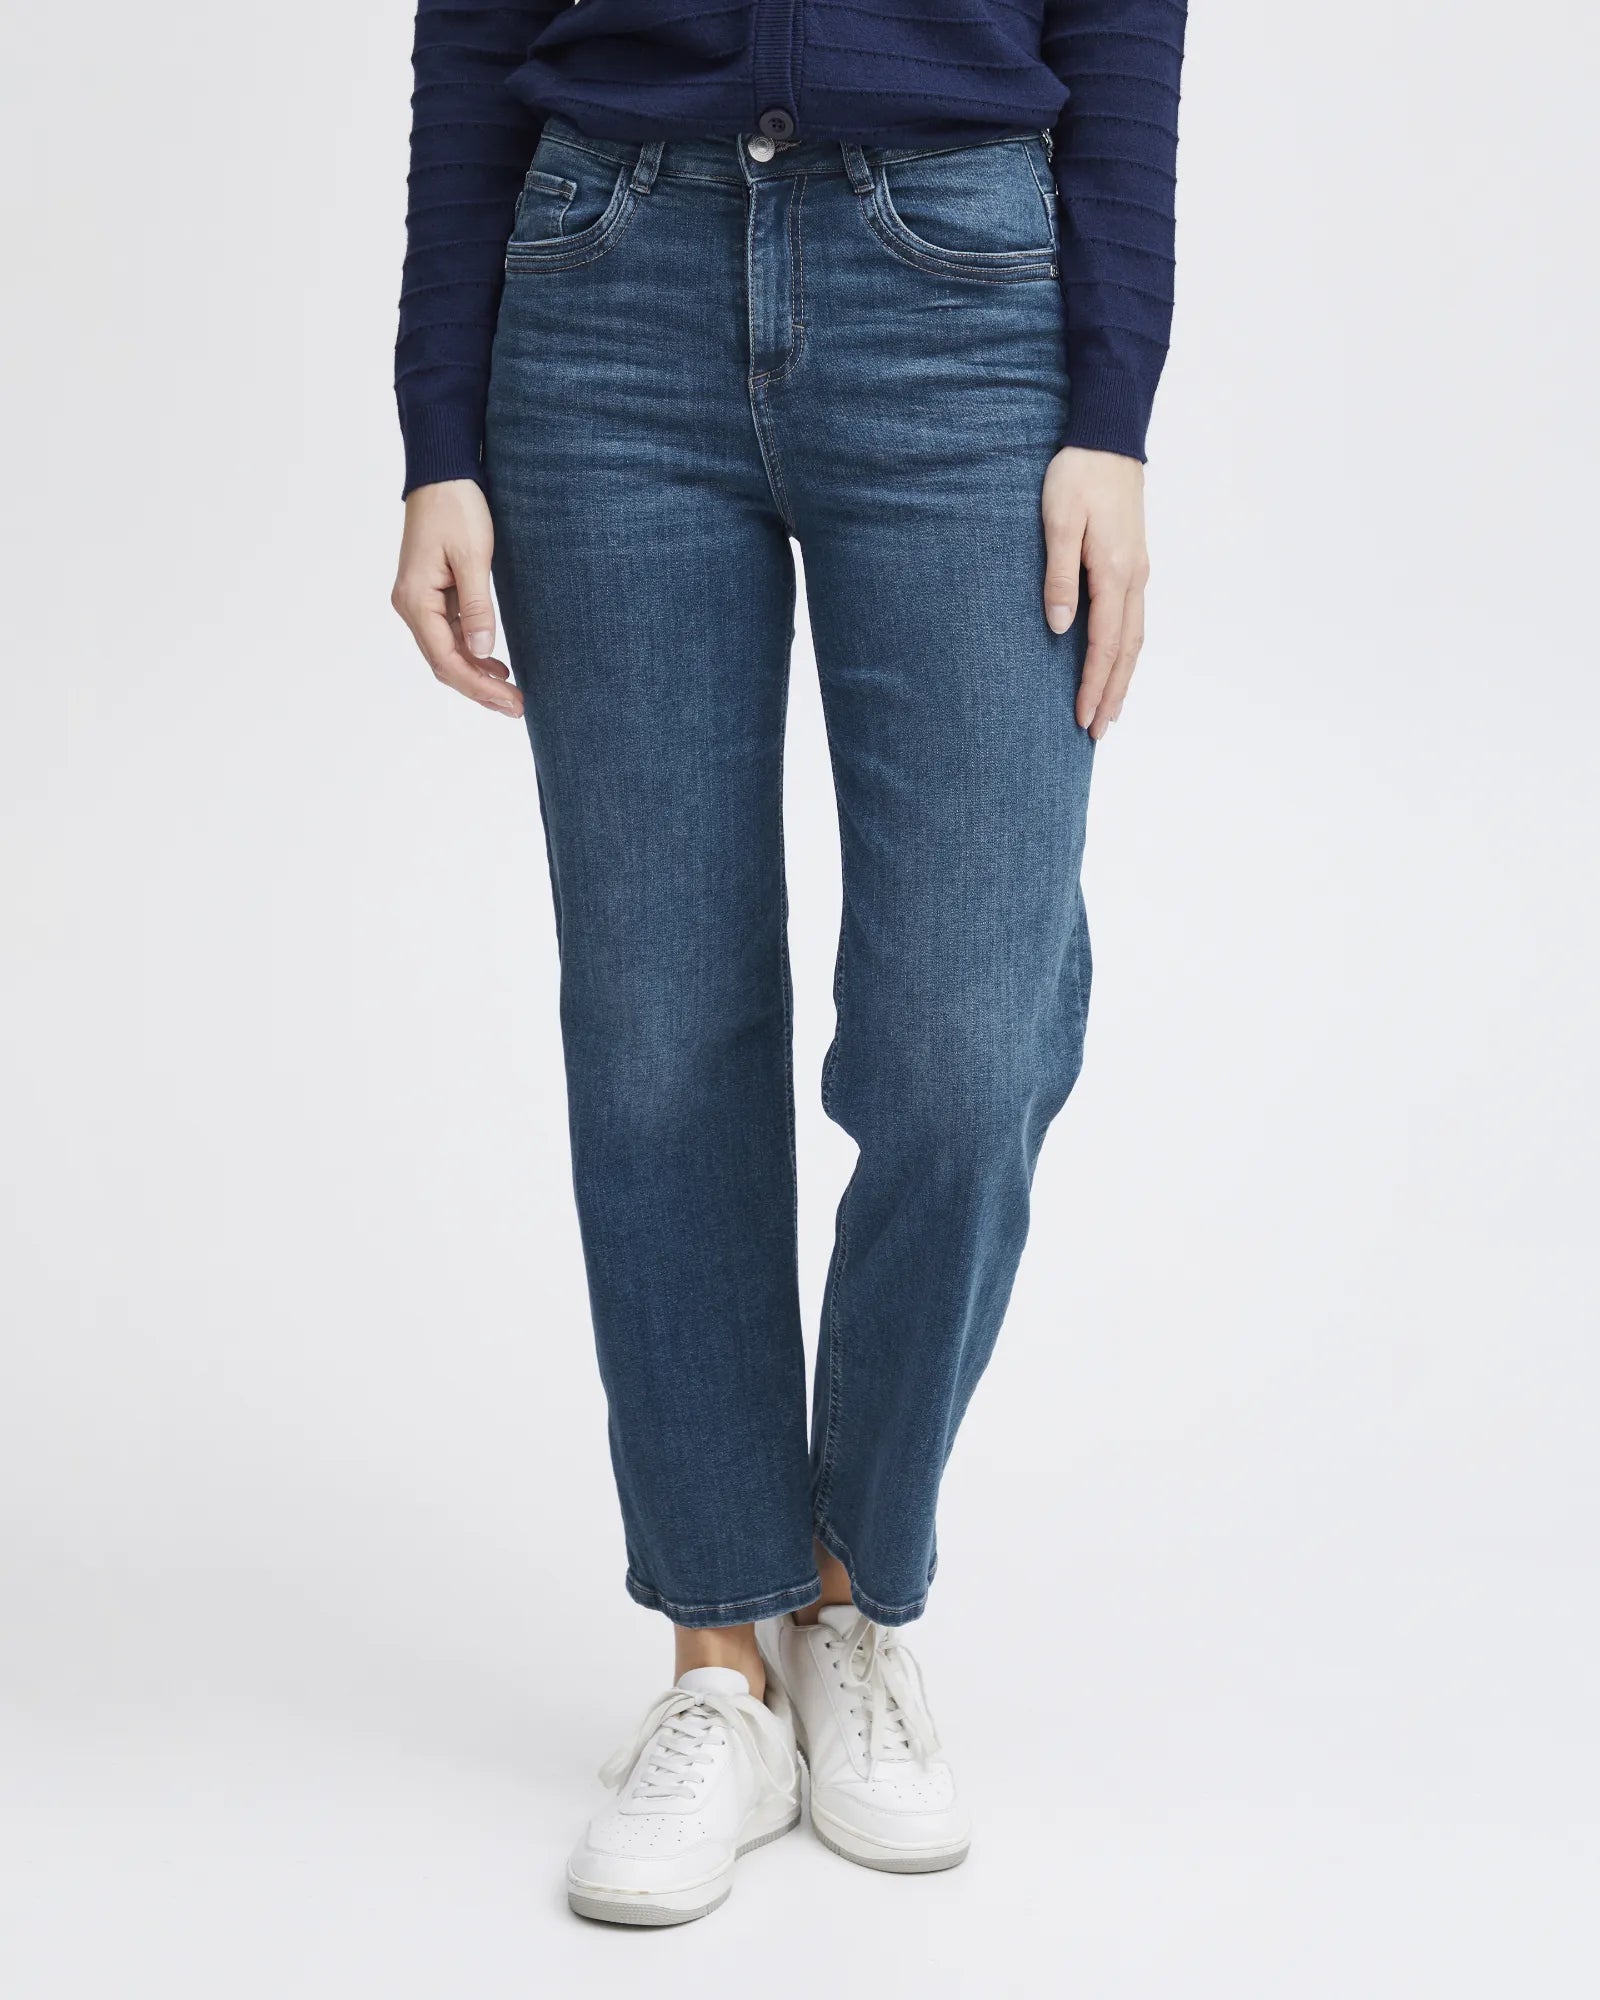 FROVER Jeans - Mid Blue Denim